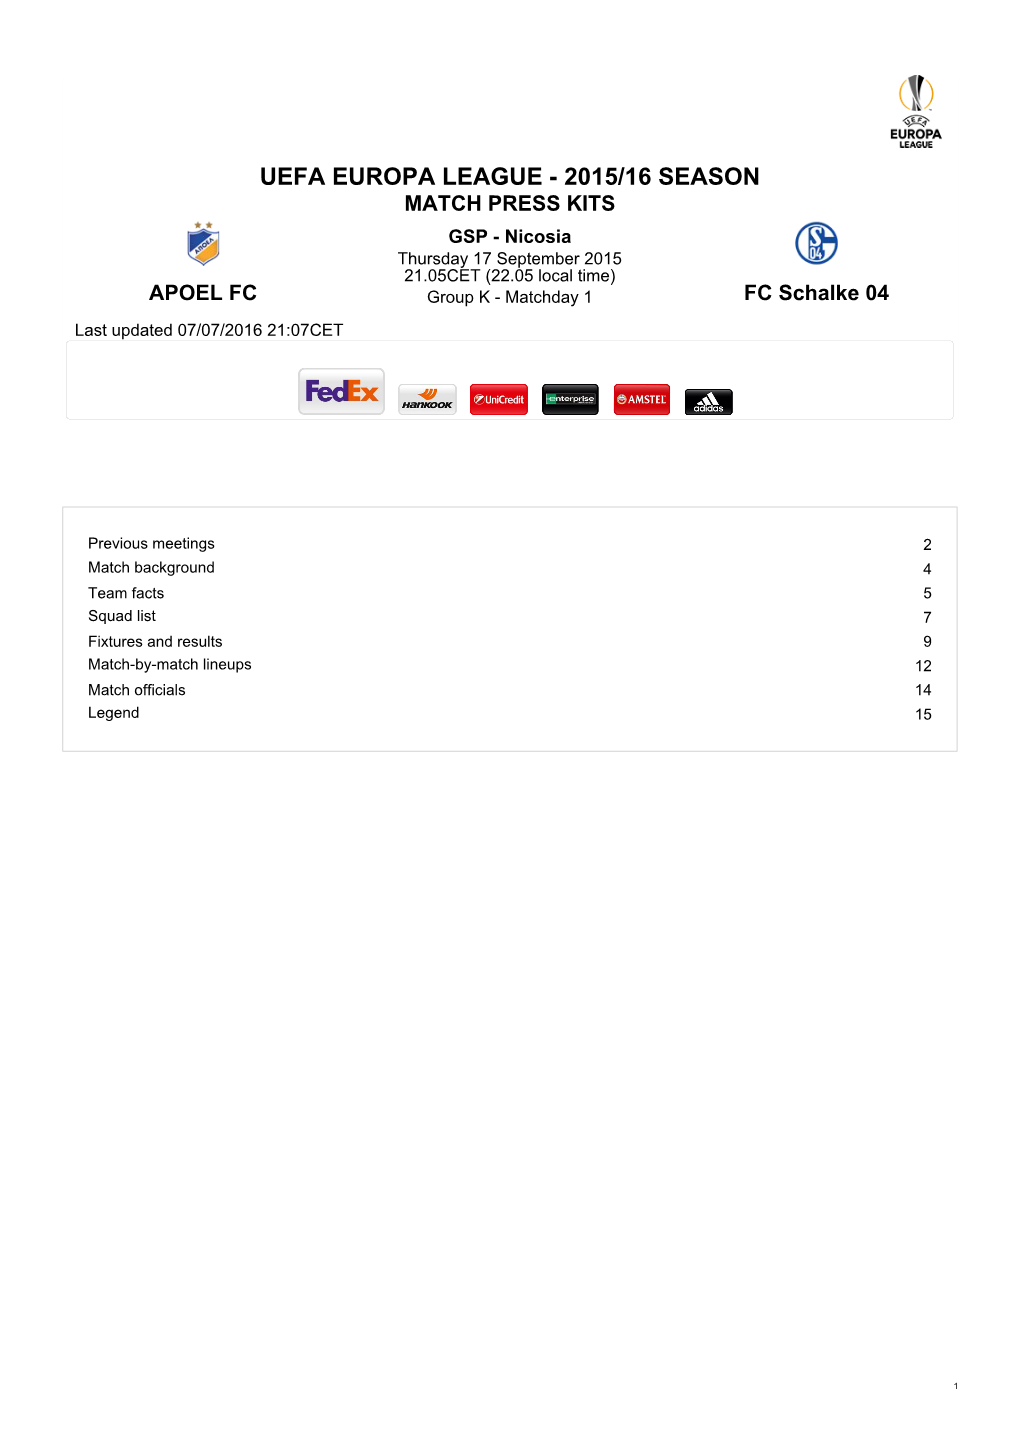 MATCH PRESS KITS GSP - Nicosia Thursday 17 September 2015 21.05CET (22.05 Local Time) APOEL FC Group K - Matchday 1 FC Schalke 04 Last Updated 07/07/2016 21:07CET